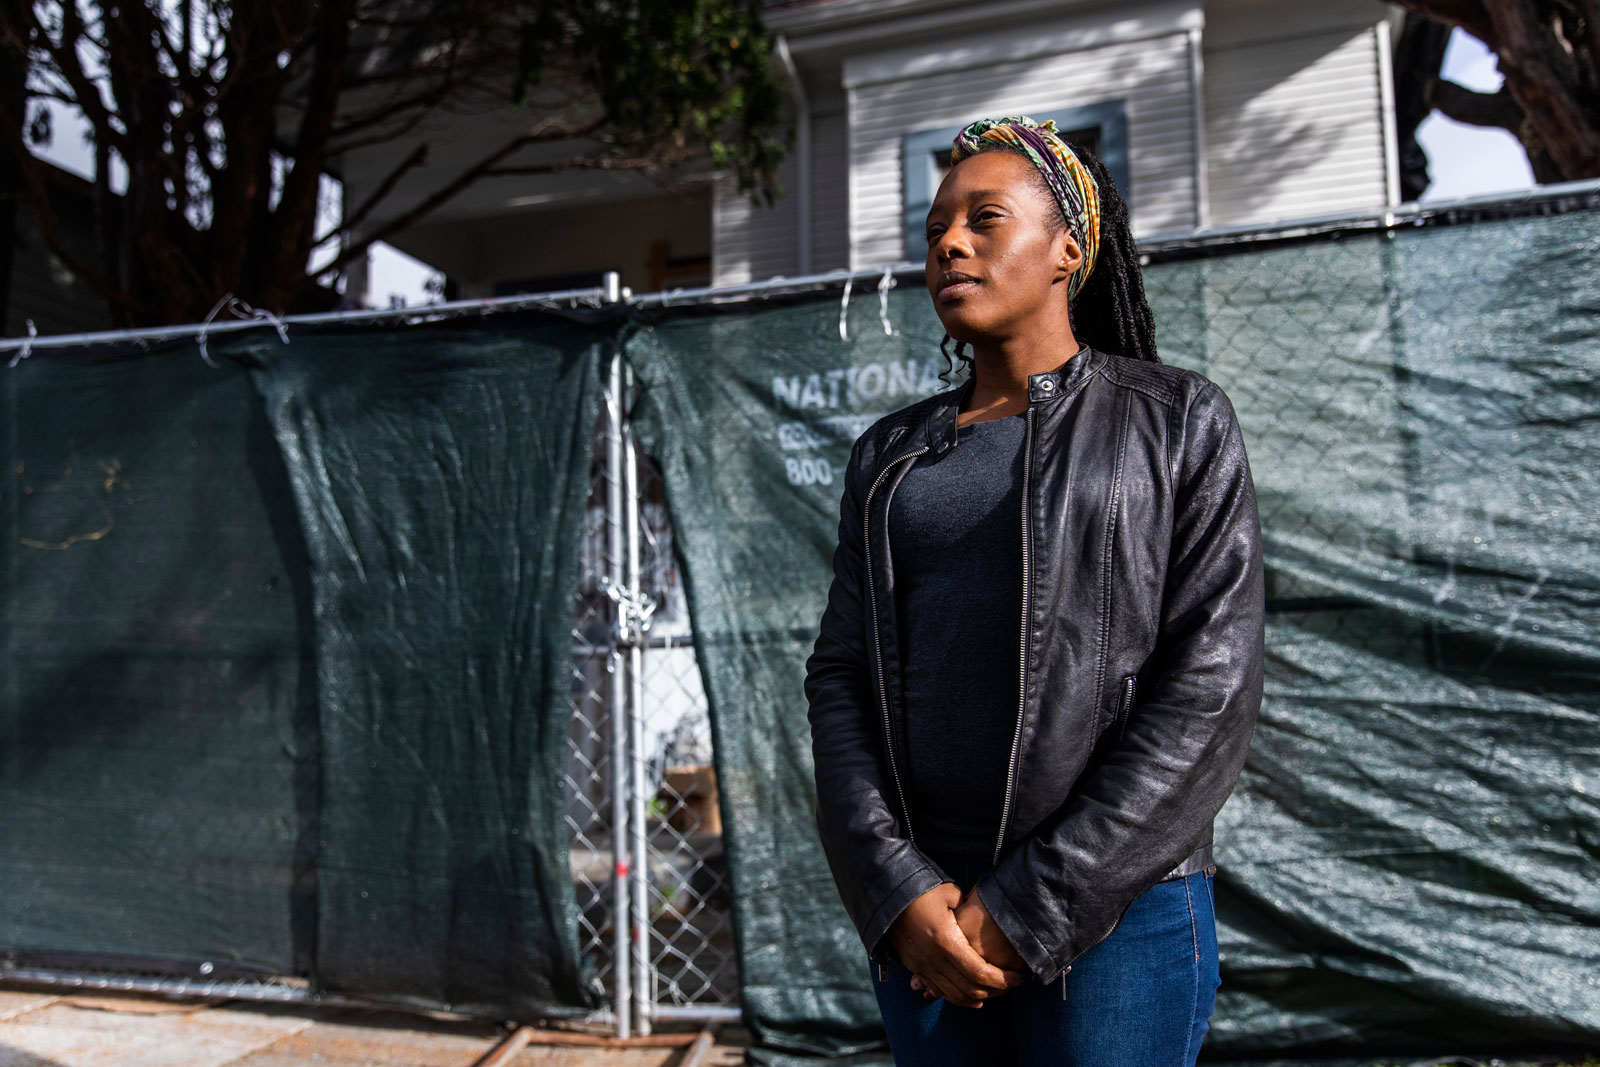 Moms 4 Housing activist Dominique Walker standing in front of 2928 Magnolia Street, the house the group occupied starting in November 2019, declaring that housing is “a human right,